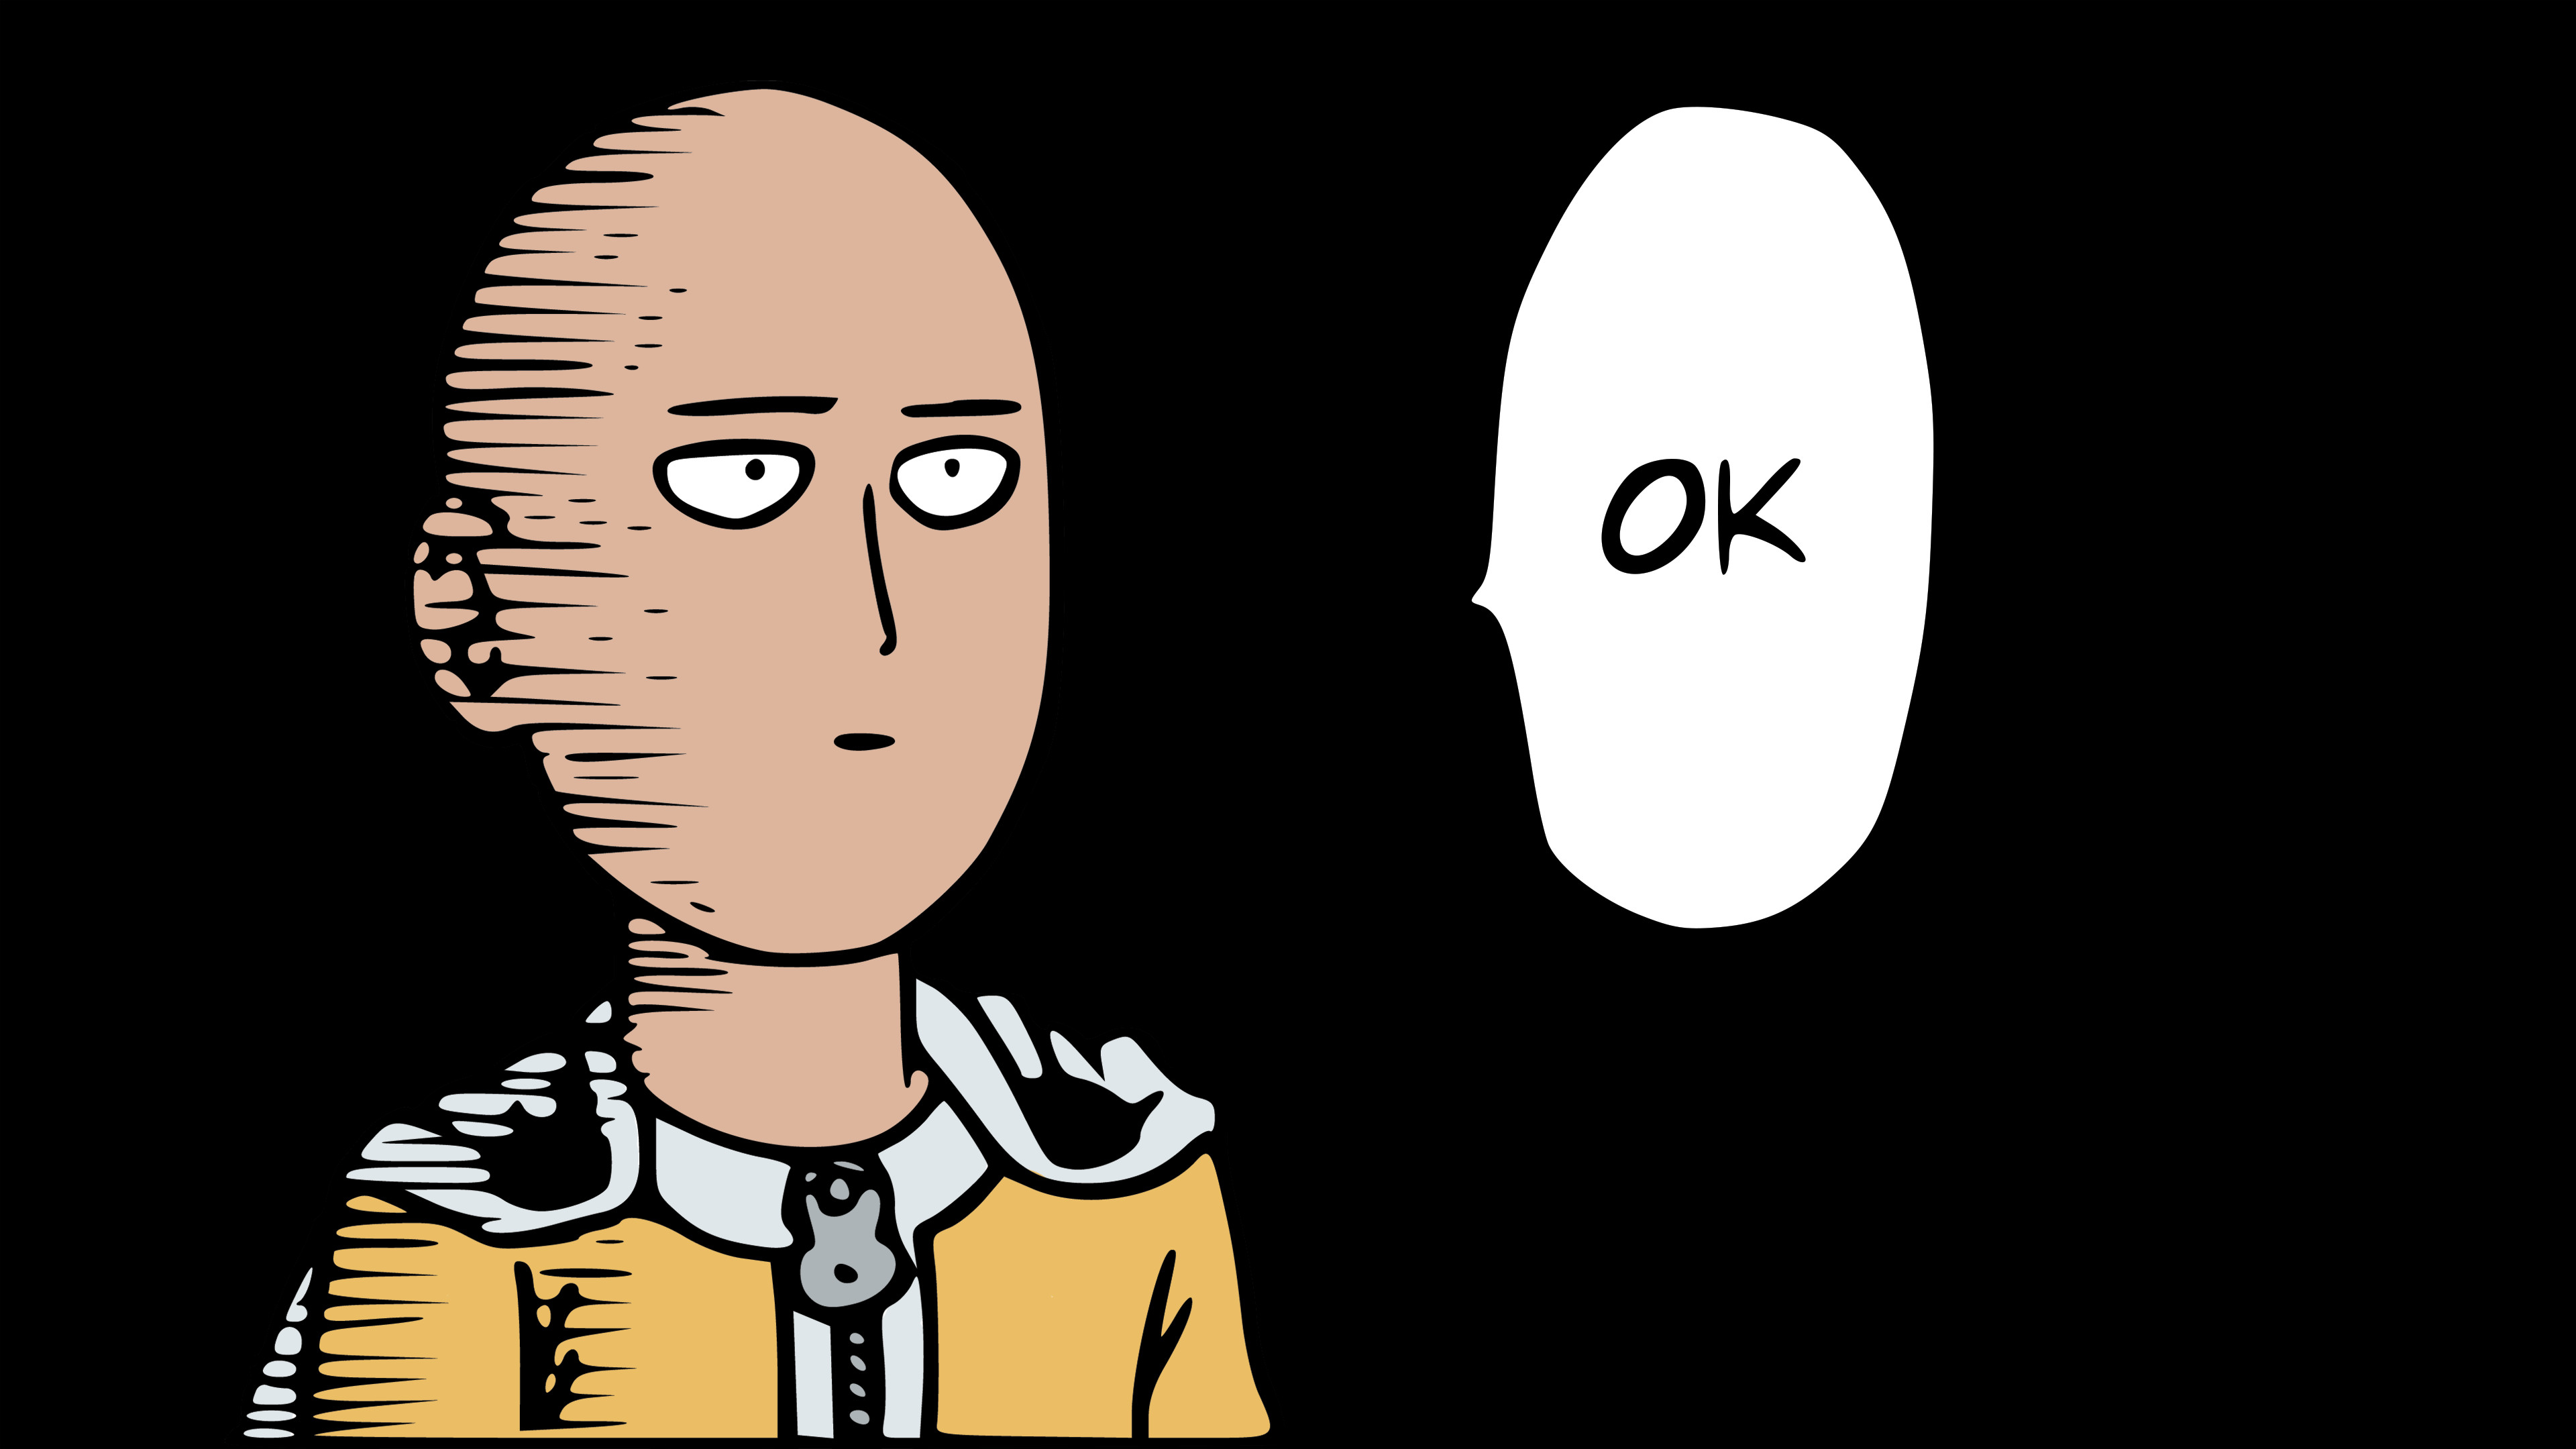 3840x2160 4K Wallpaper | One-Punch Man | Know Your Meme